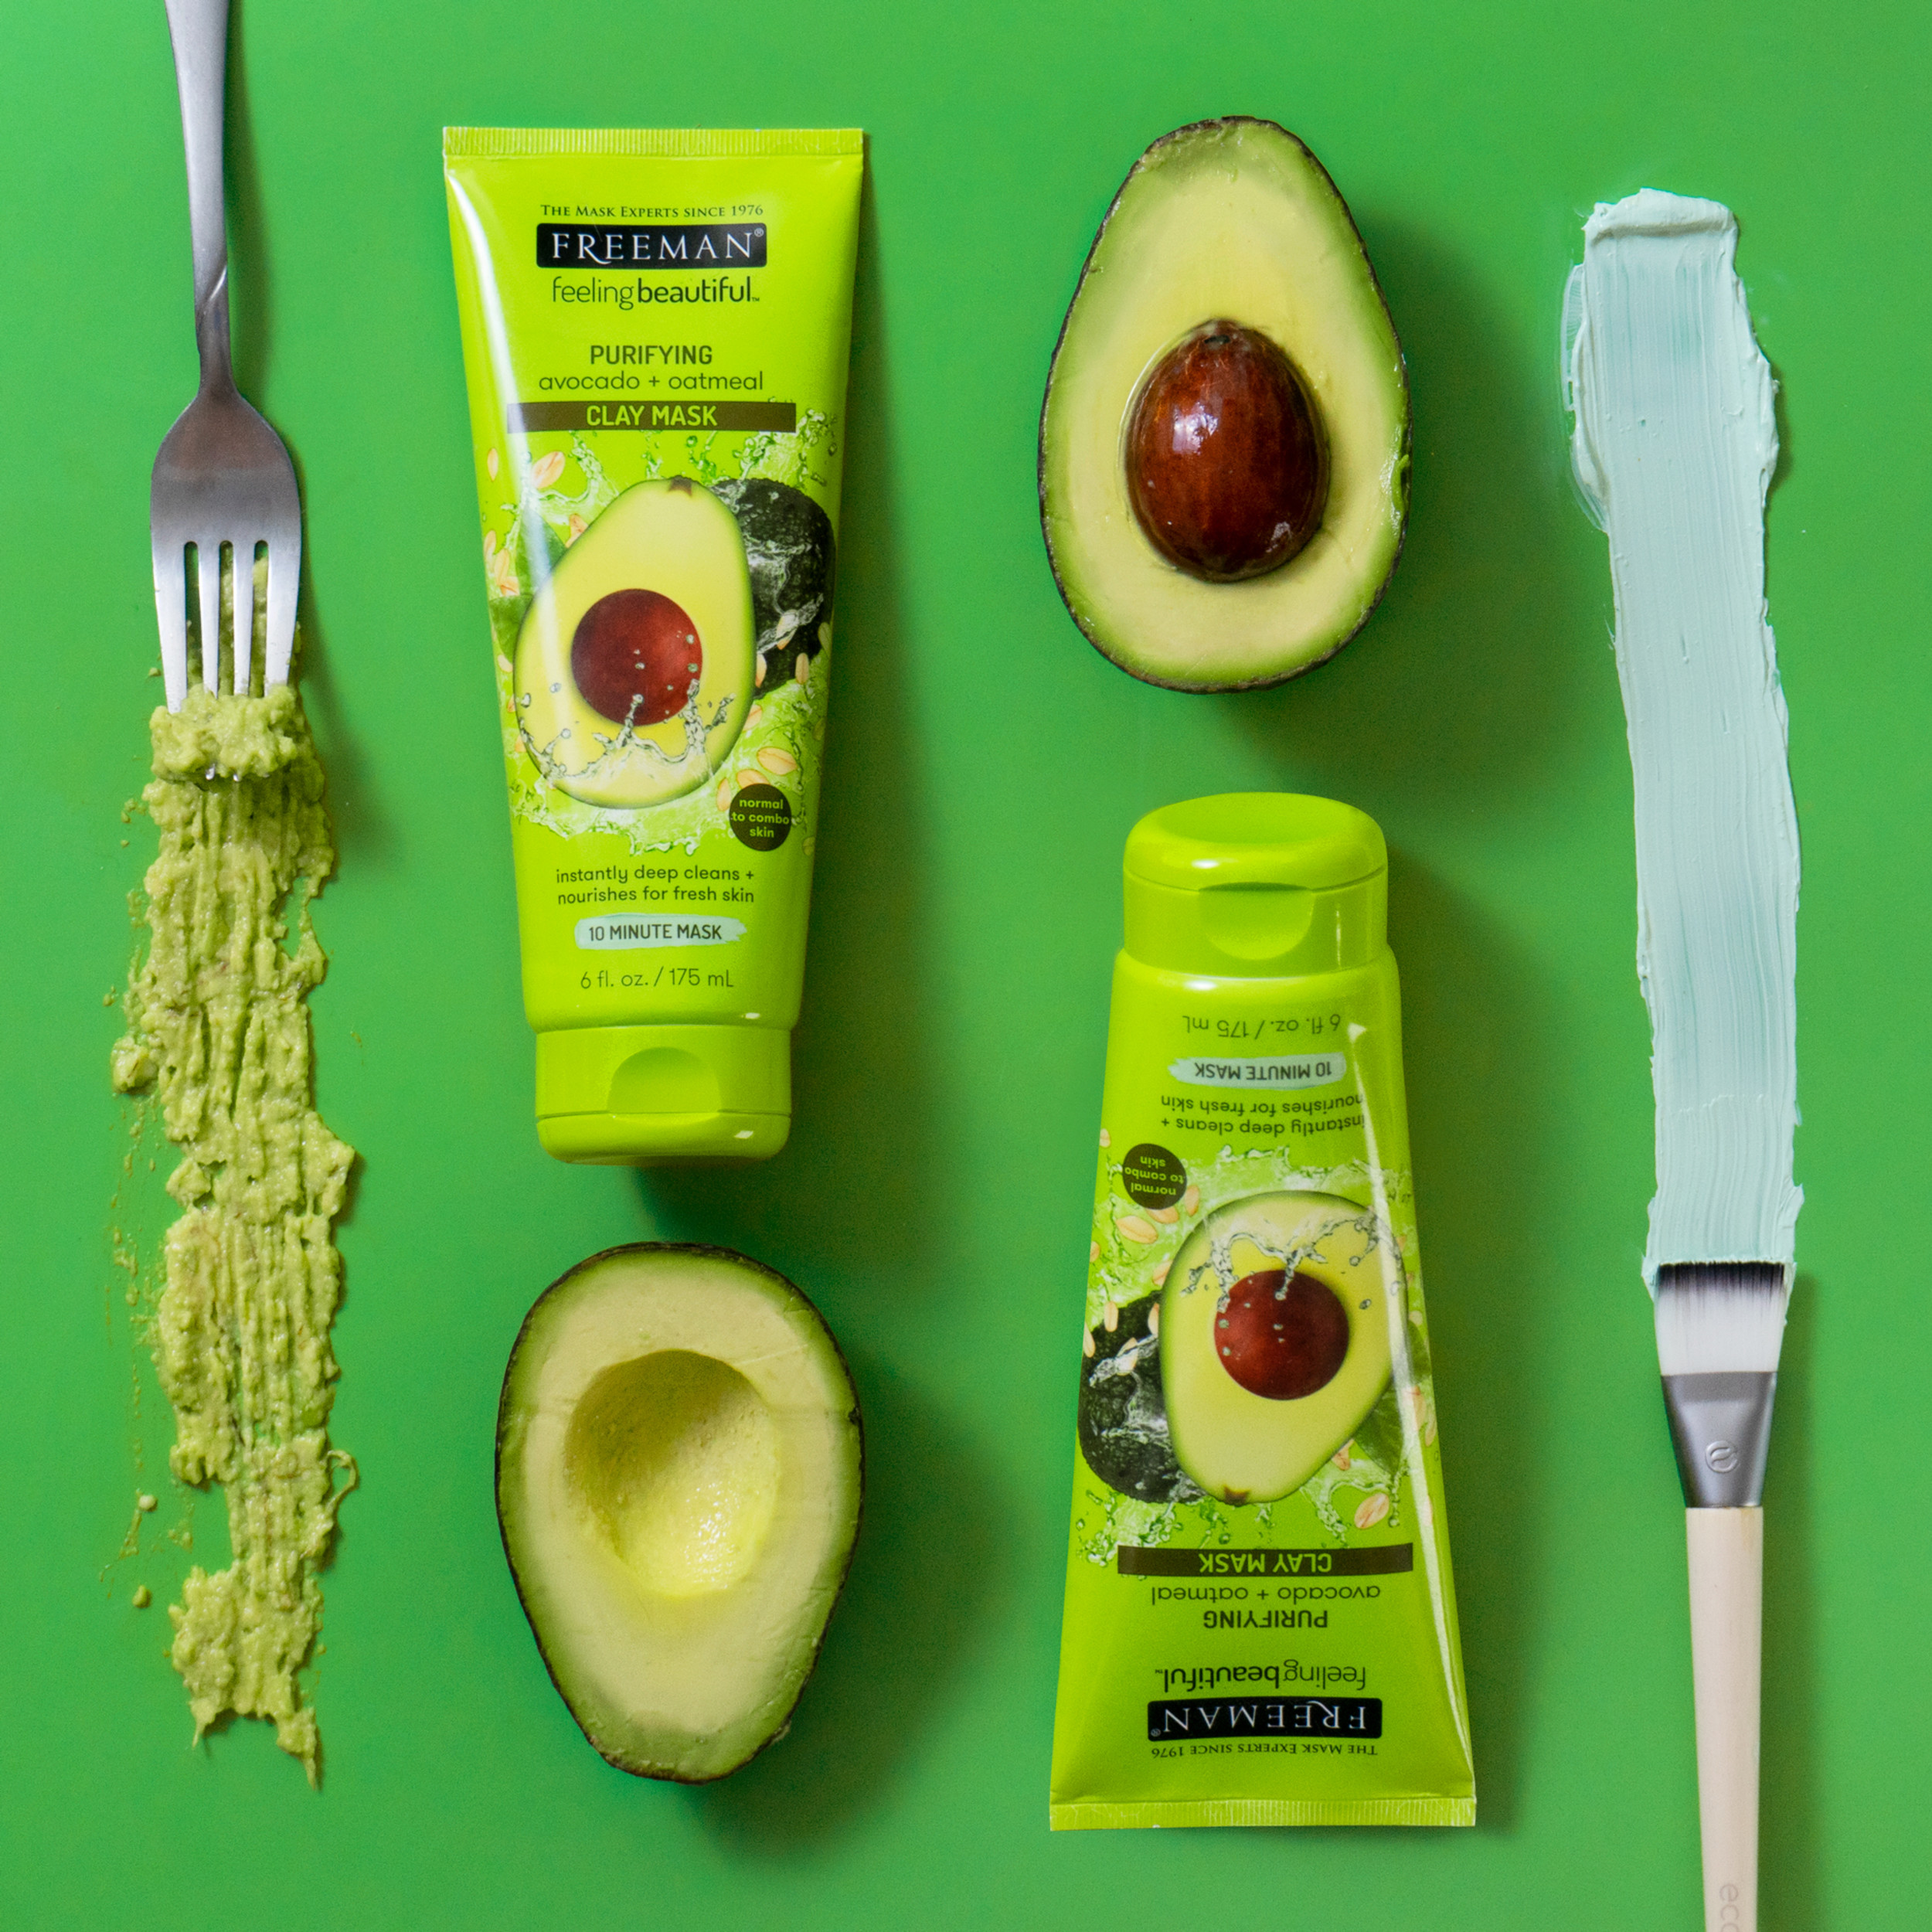 Freeman Purifying Avocado & Oatmeal Clay Facial Mask, Face Mask Instantly Deep Cleans, Creates Fresh Skin With Vitamin E, Perfect For Normal To Combination Skin, 6 fl.oz./175 mL Tube - image 5 of 5